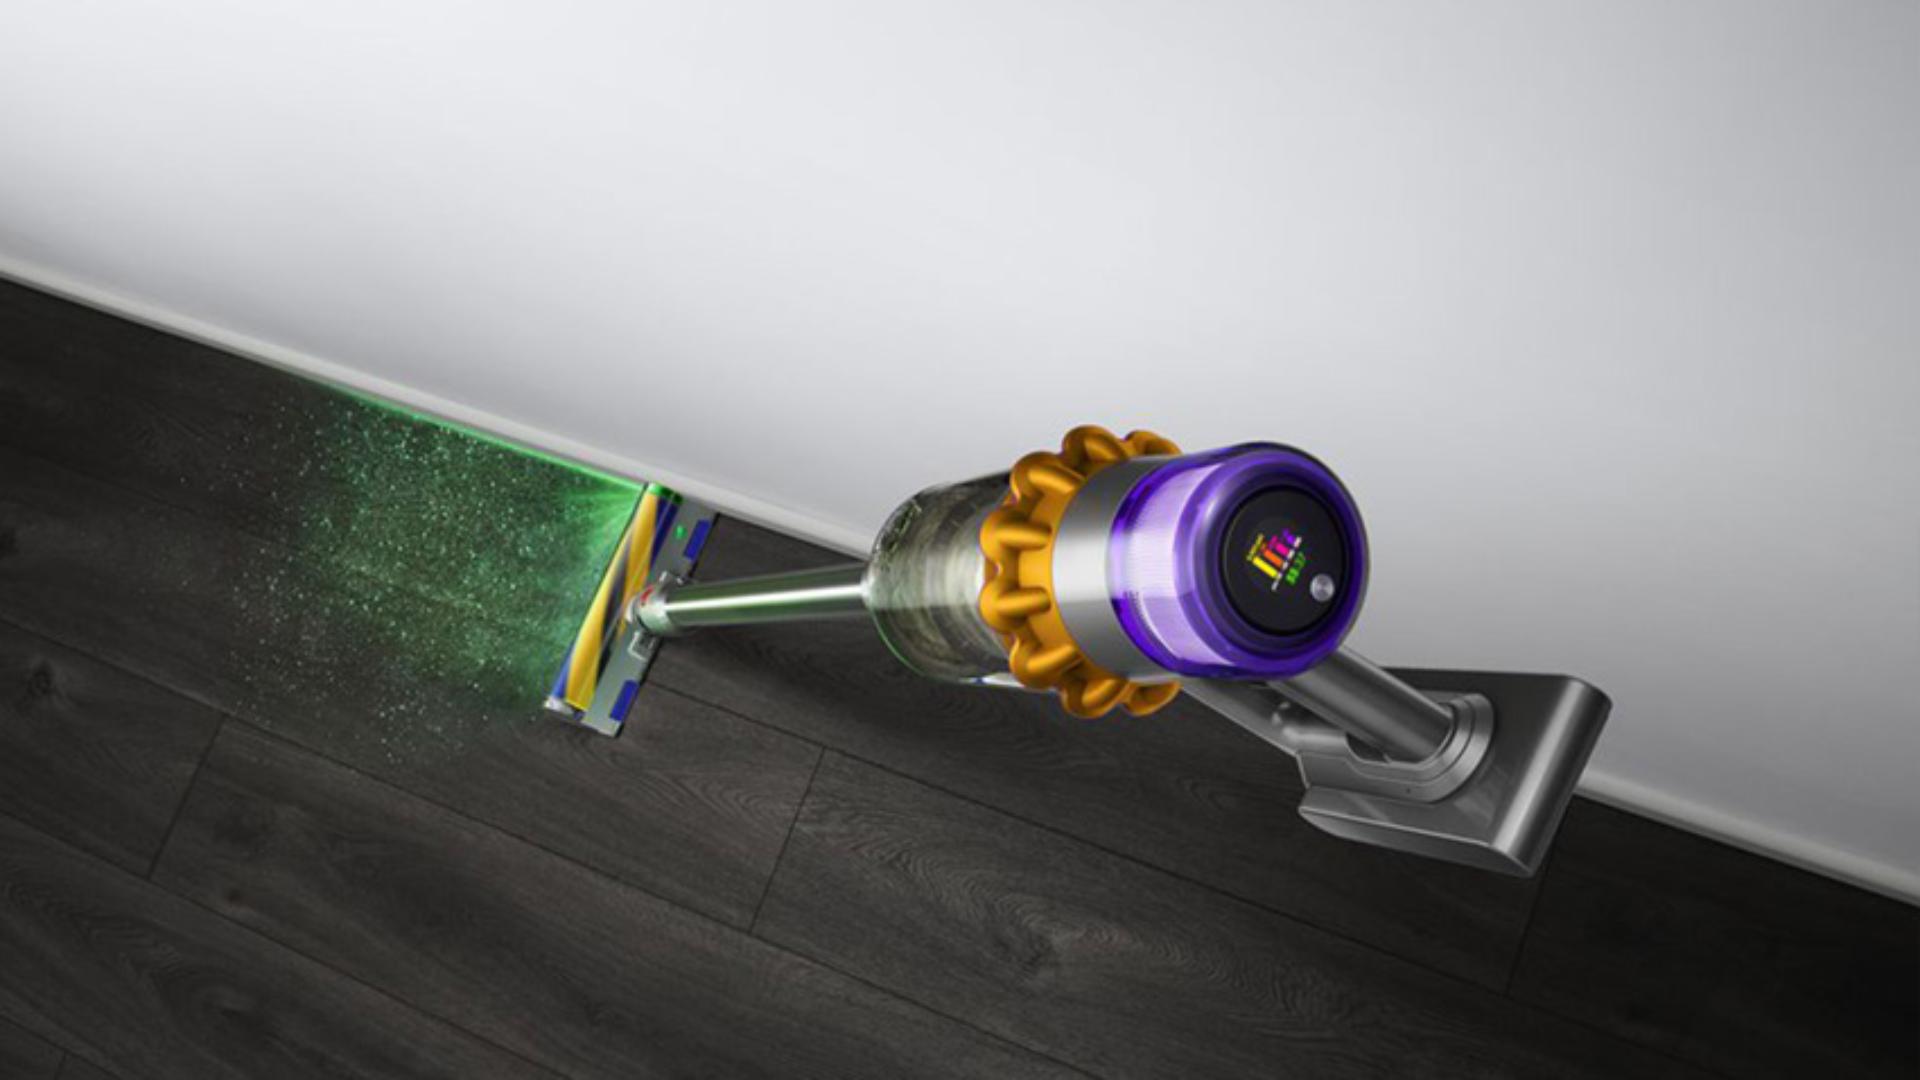 Dyson V11 vaccum cleaner lifting dirt from carpet